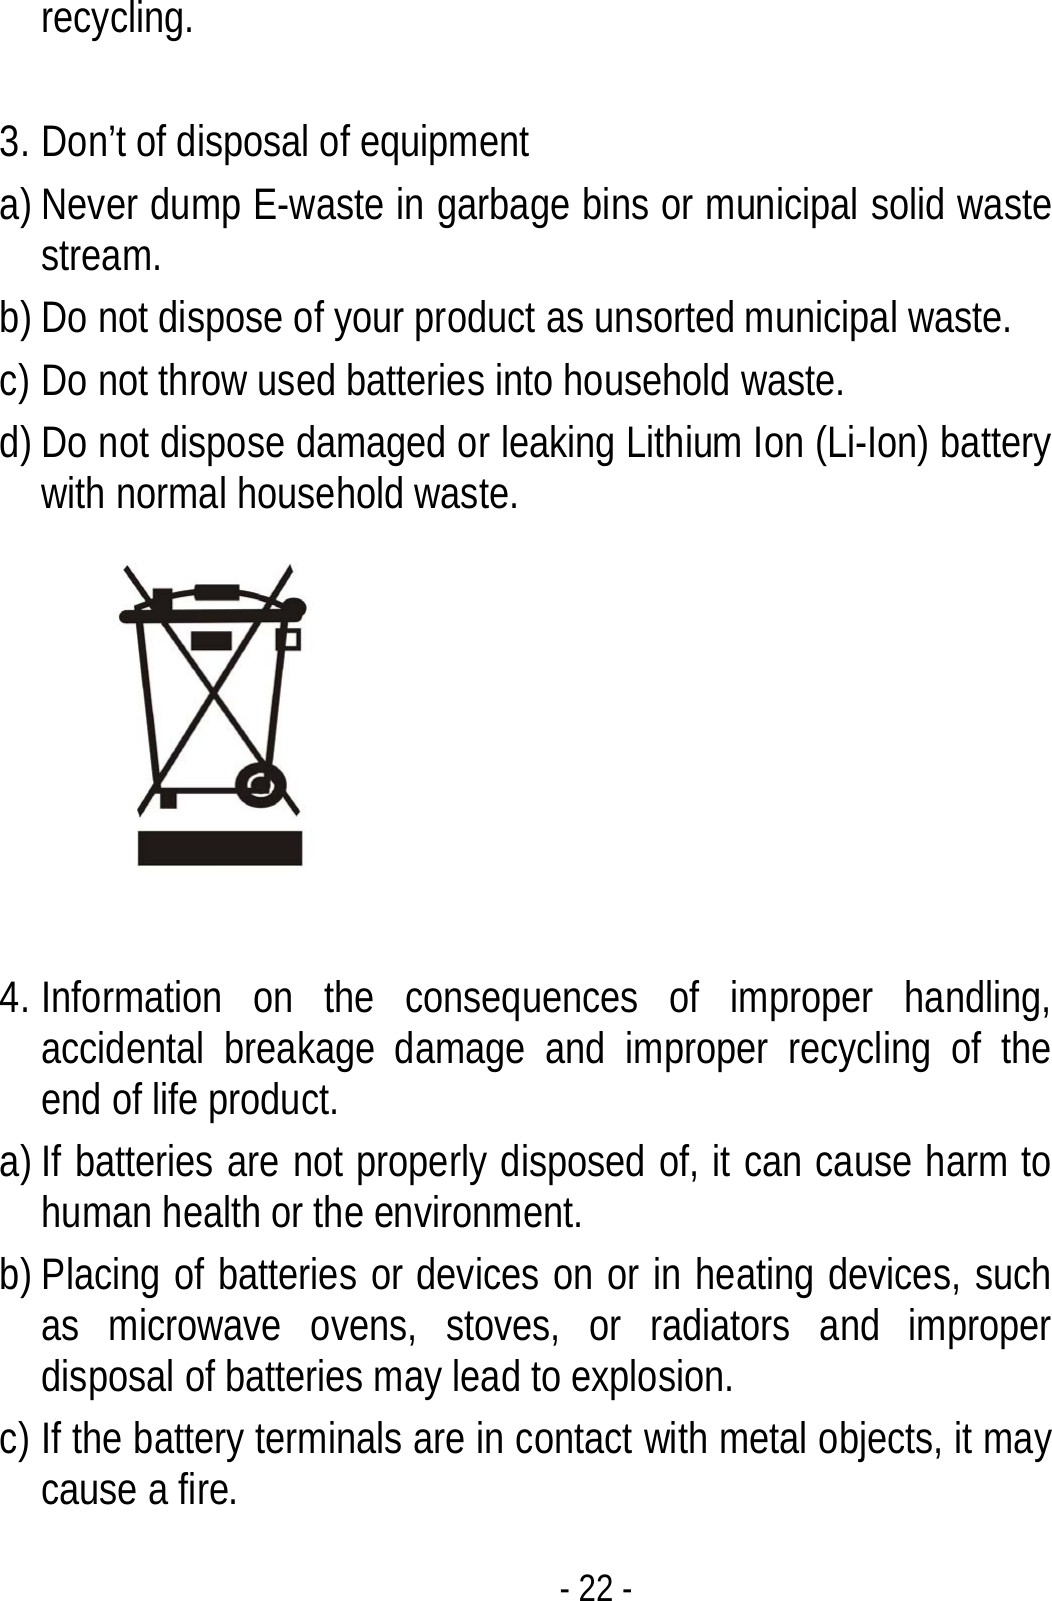 - 22 - recycling.   3. Don’t of disposal of equipment   a) Never dump E-waste in garbage bins or municipal solid waste stream.  b) Do not dispose of your product as unsorted municipal waste.   c) Do not throw used batteries into household waste. d) Do not dispose damaged or leaking Lithium Ion (Li-Ion) battery with normal household waste.   4. Information on the consequences of improper handling, accidental breakage damage and improper recycling of the end of life product. a) If batteries are not properly disposed of, it can cause harm to human health or the environment. b) Placing of batteries or devices on or in heating devices, such as microwave ovens, stoves, or radiators and improper disposal of batteries may lead to explosion.   c) If the battery terminals are in contact with metal objects, it may cause a fire. 